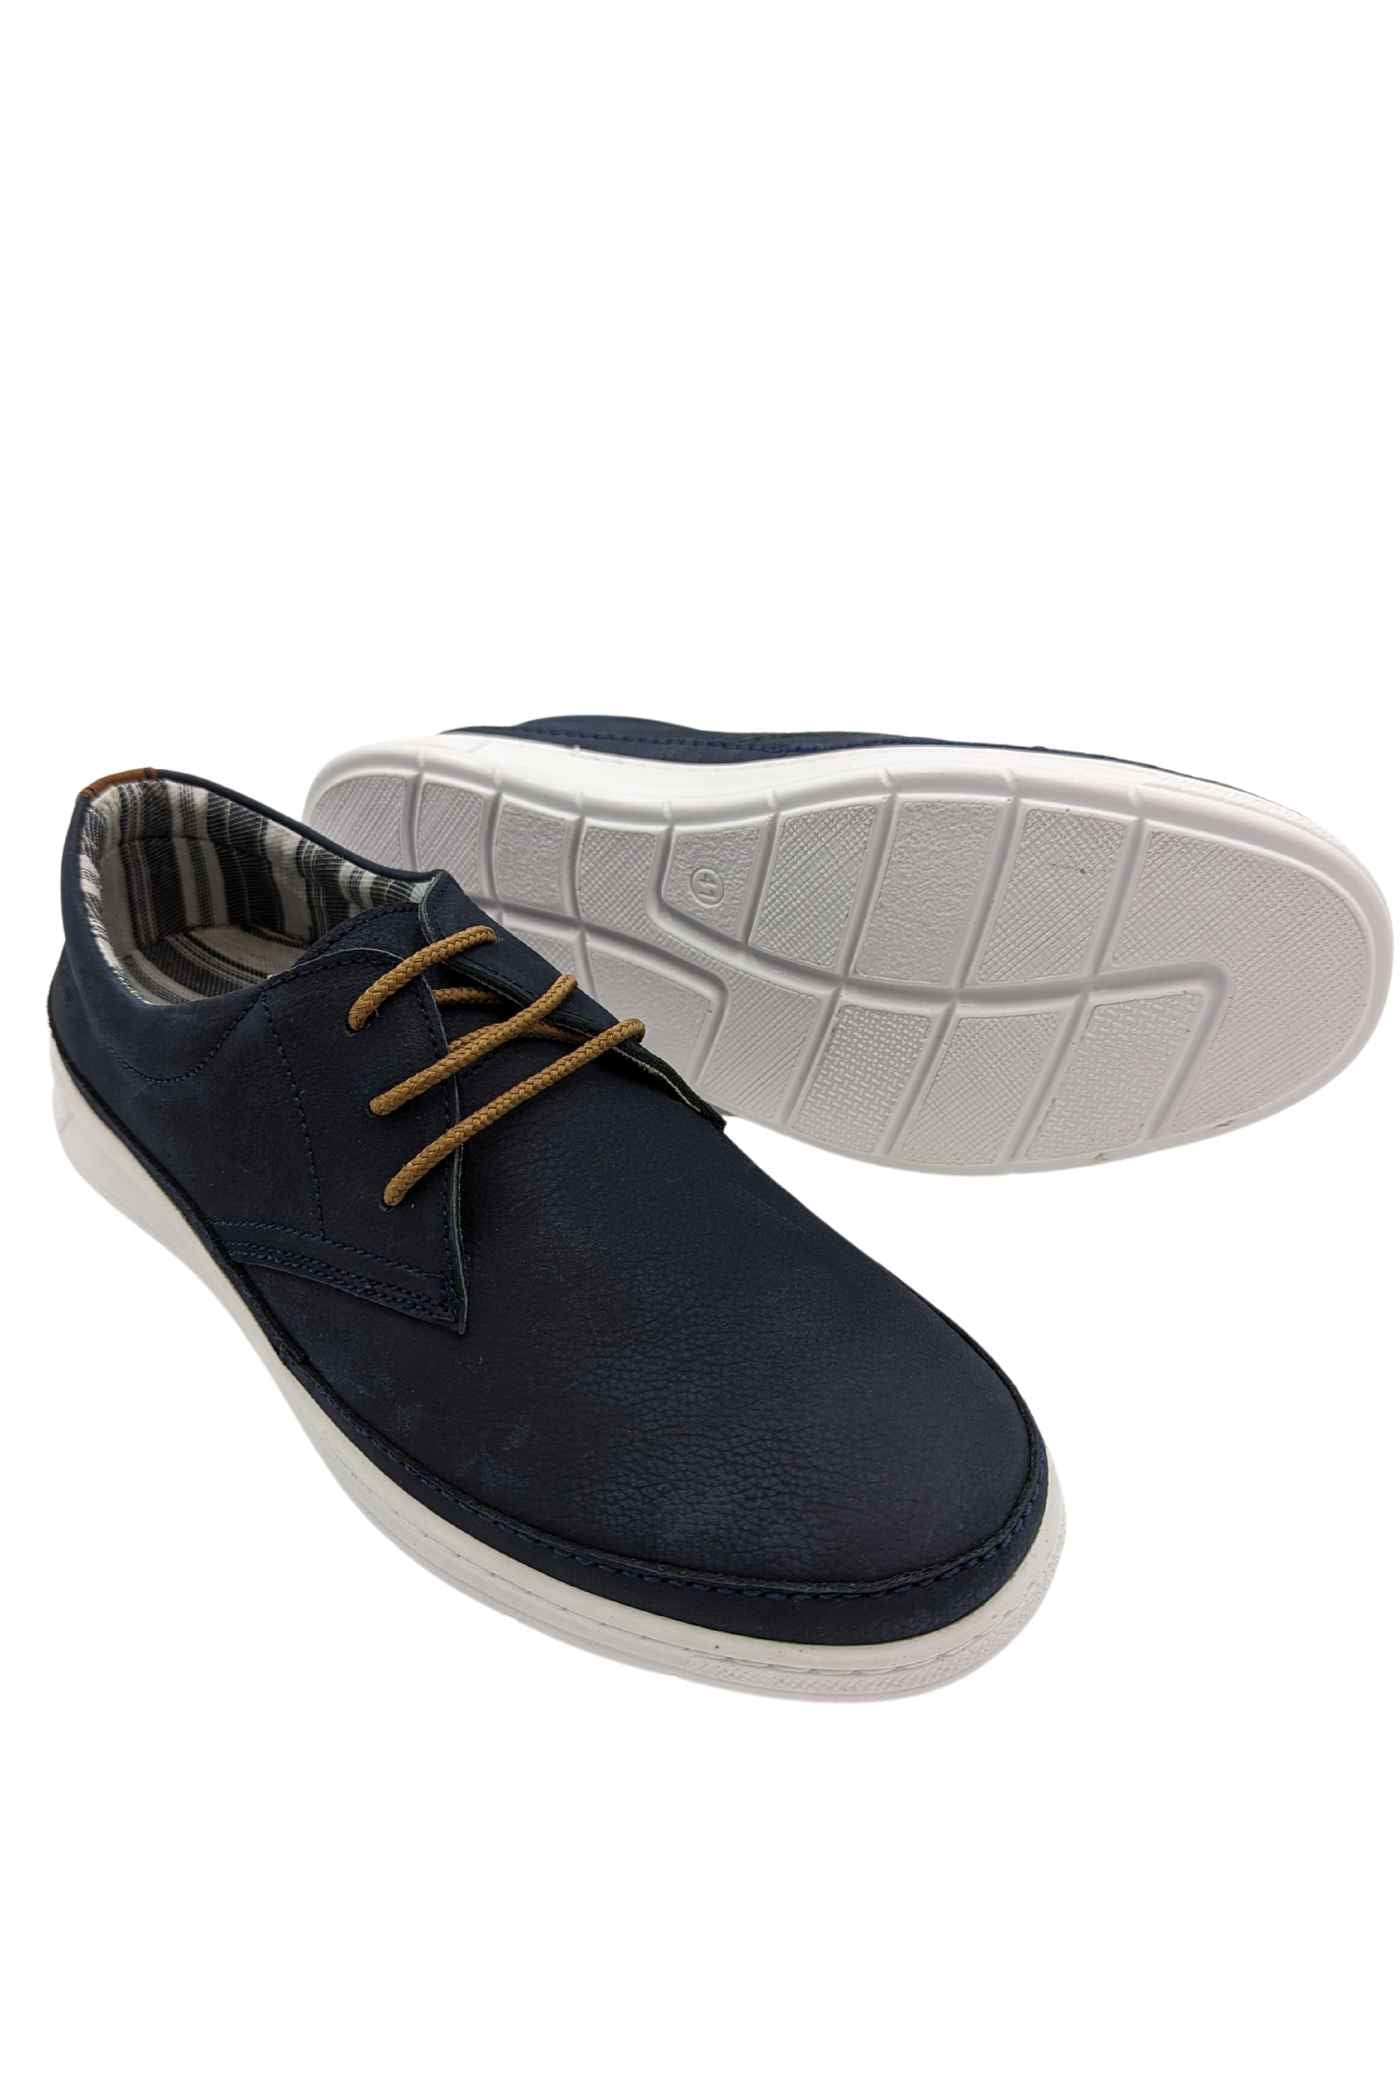 Sully Navy Shoe-Sole view